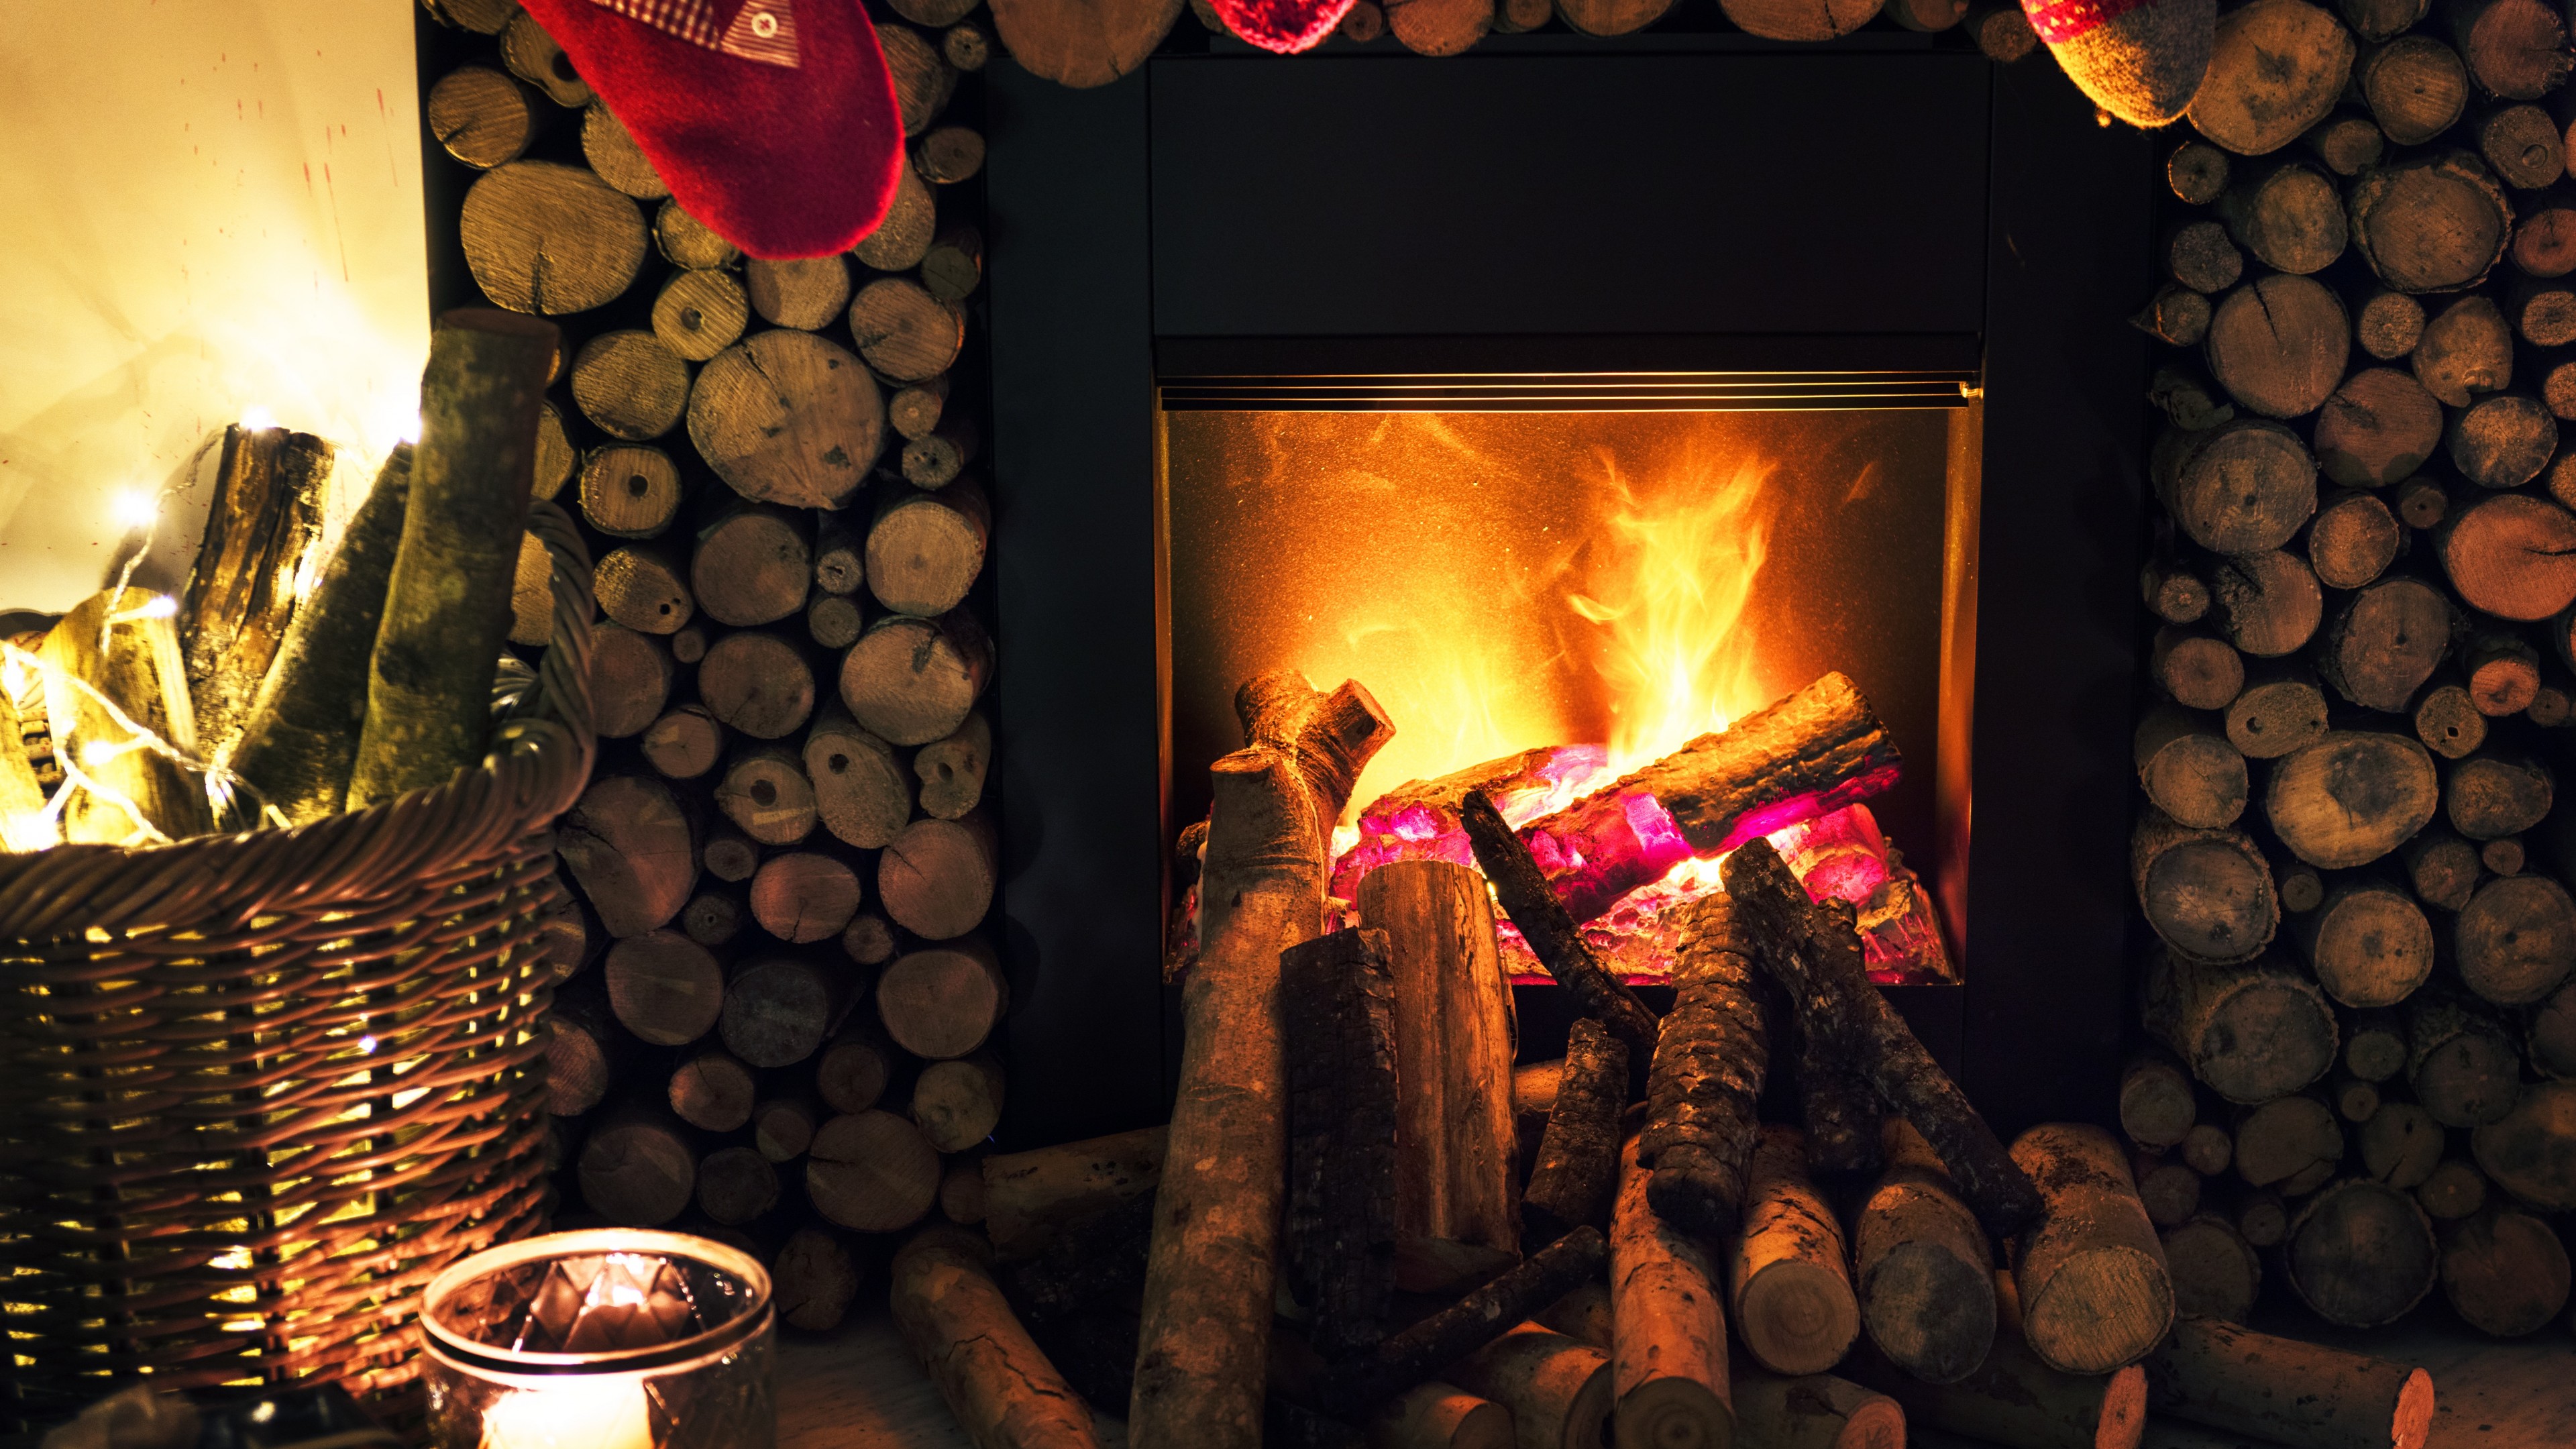 Wallpaper / Christmas, New Year, fireplace, decorations, 4K free download